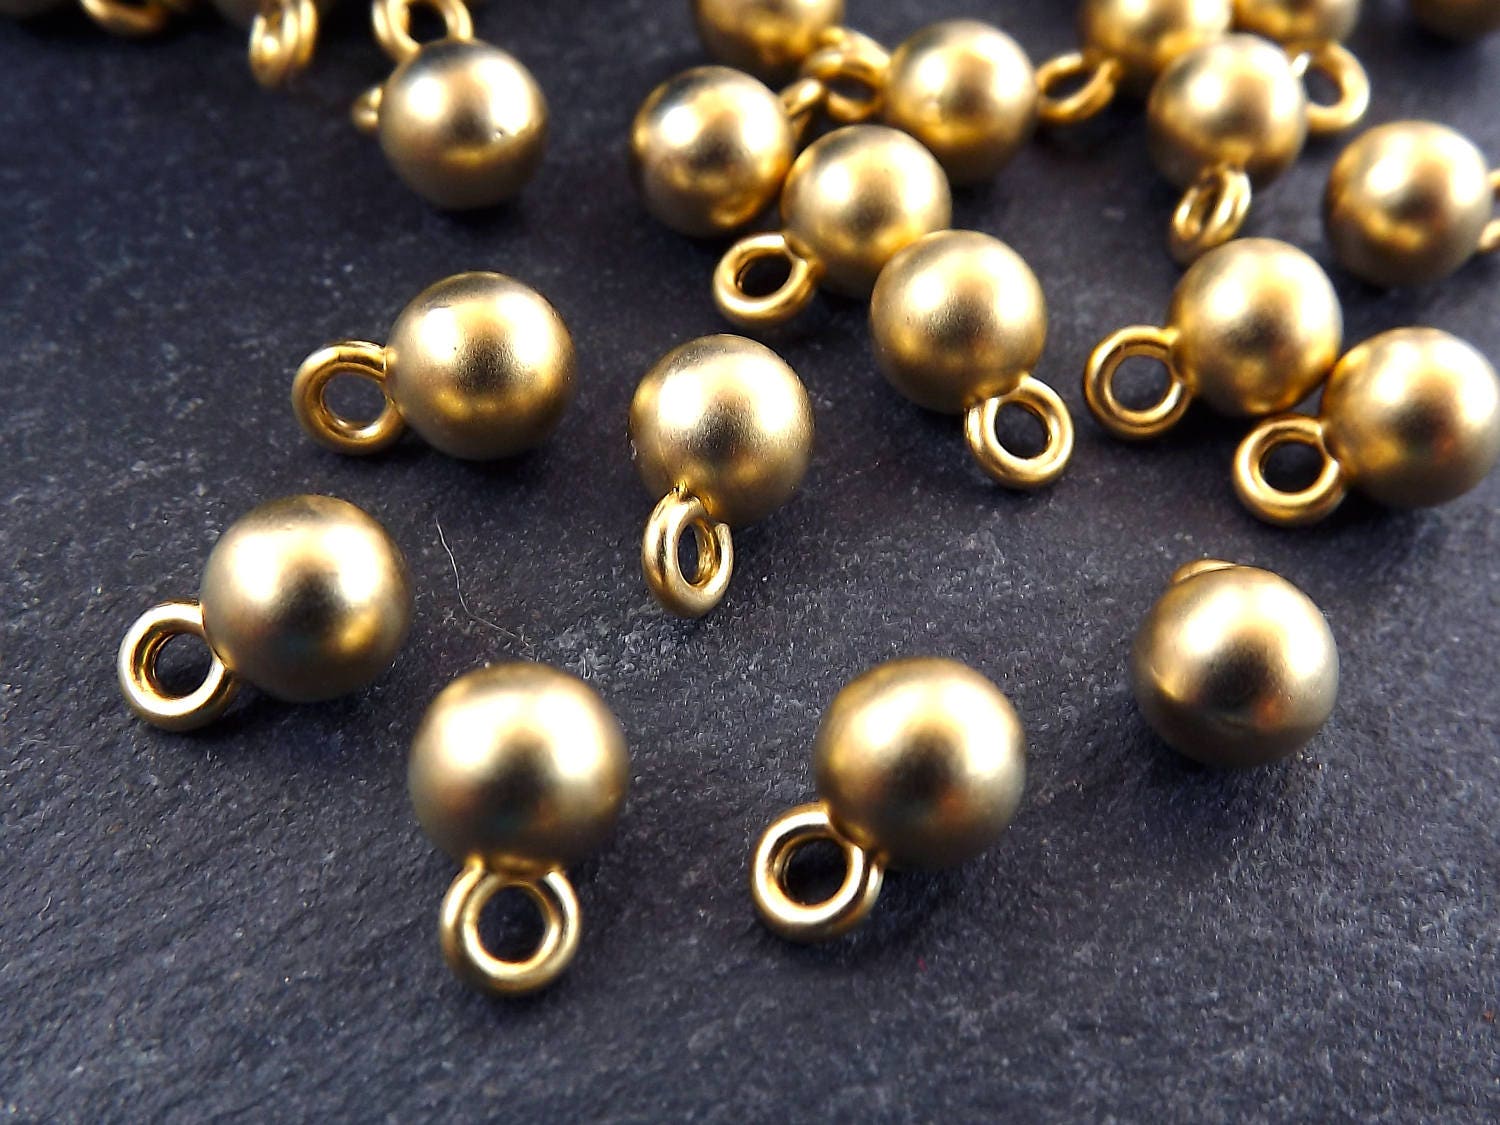 Round Gold Ball Drop Charms Jewelry Making Supplies Findings Metal Beads  Brass Beads Tarnish Resistant 22k Matte Gold Plated - 6mm - 10cs